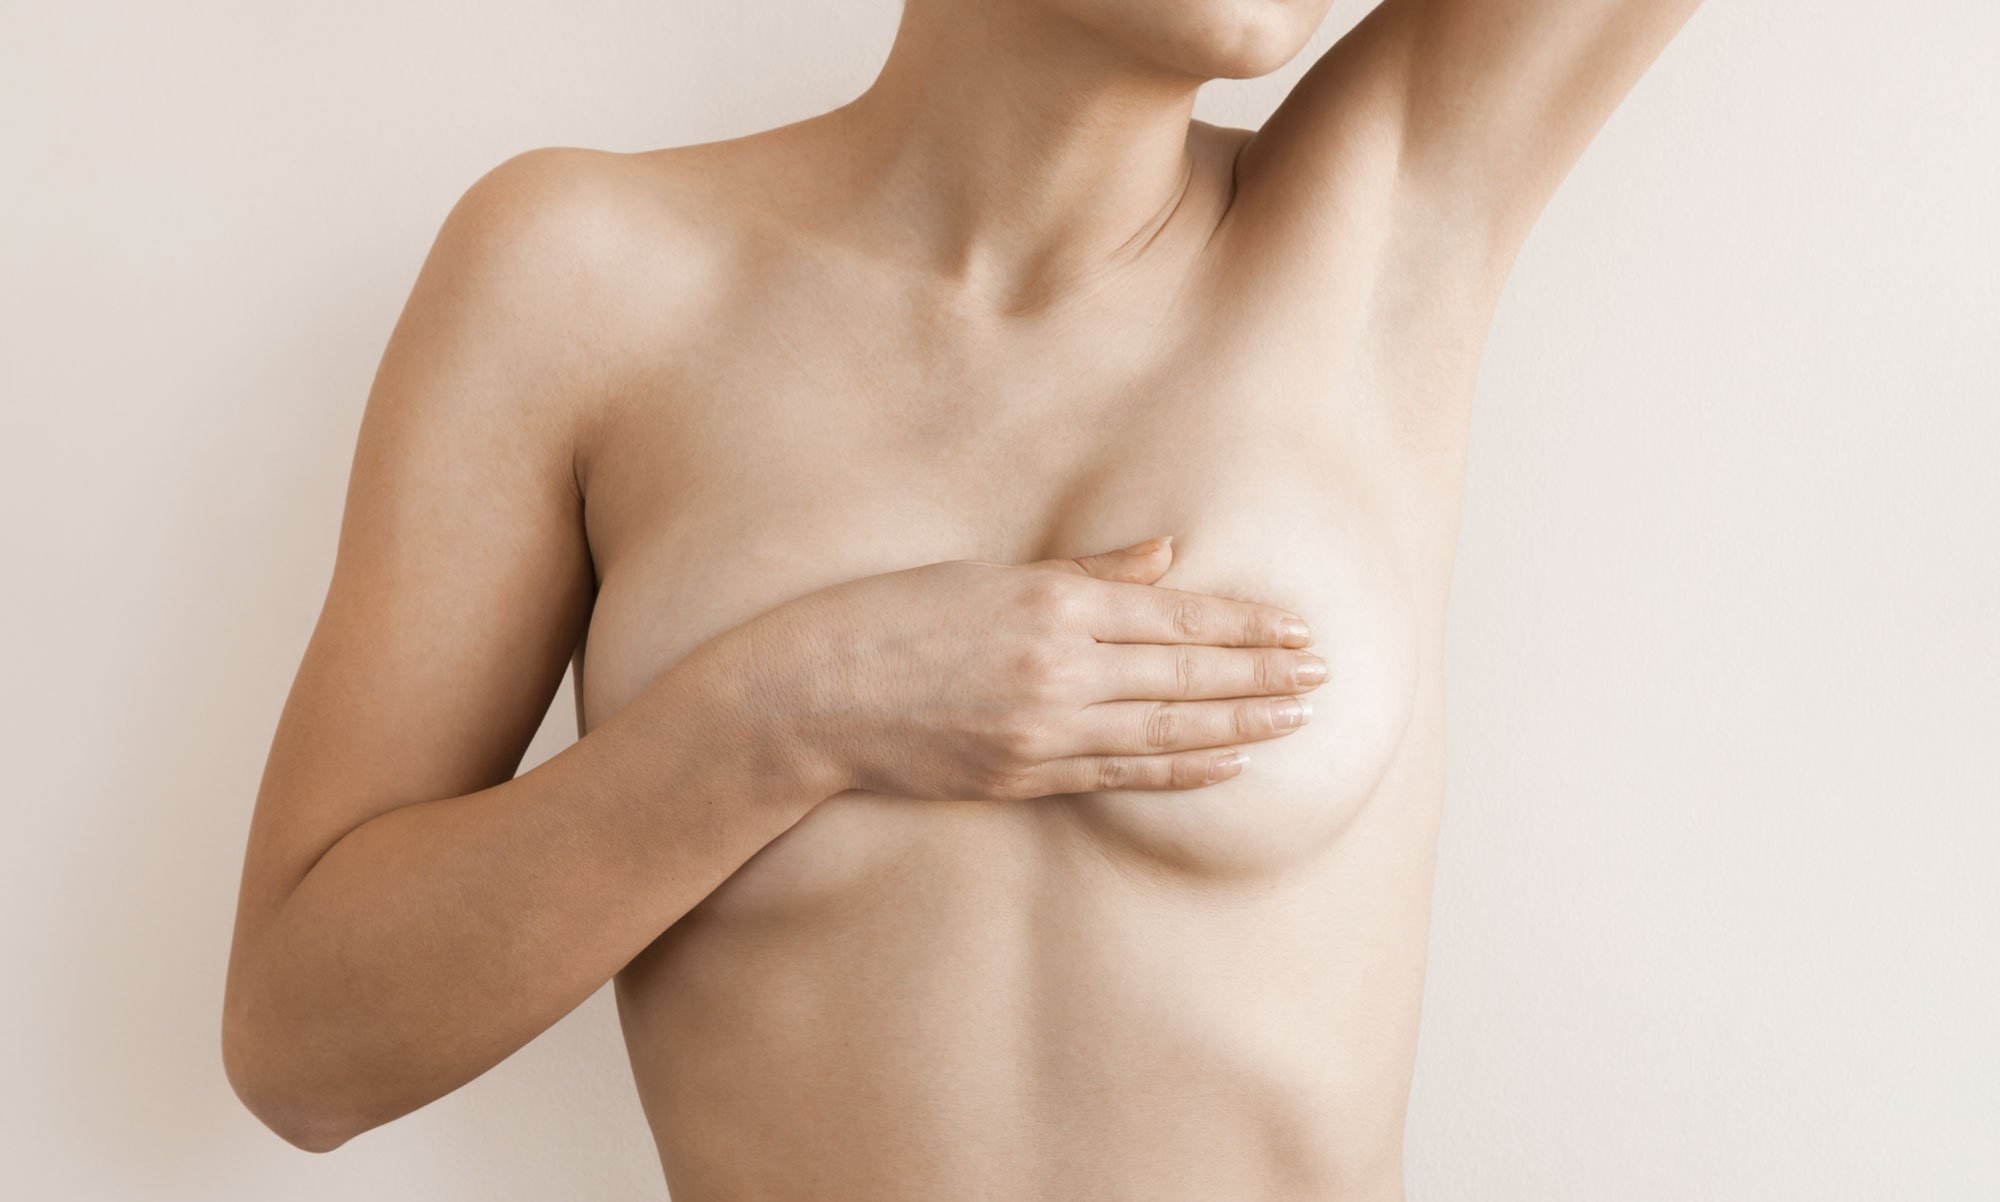 How to Get Bigger Breasts Without Surgery? Non-Invasive Non